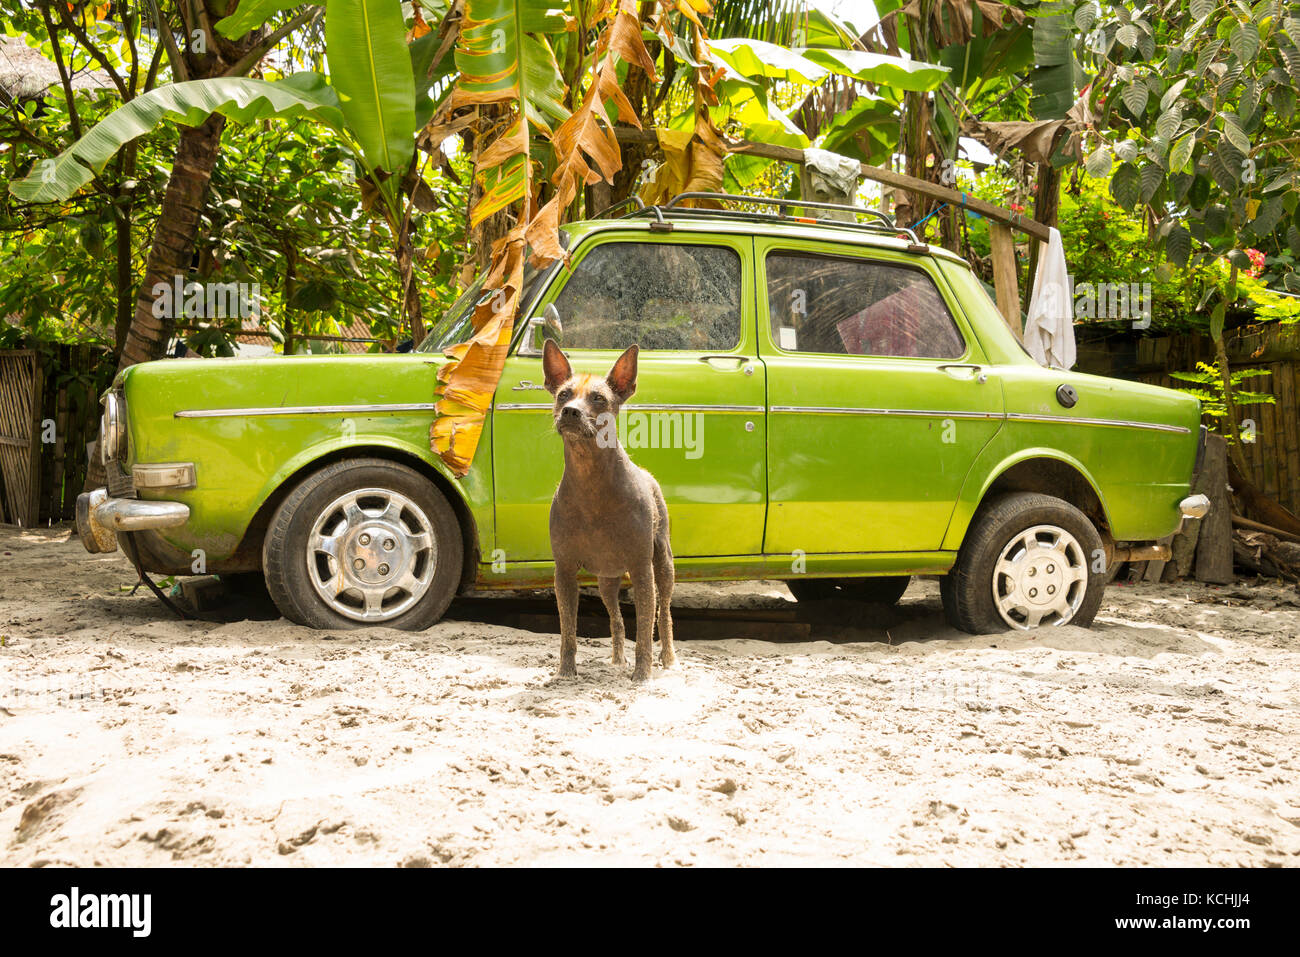 A dog stands in front of an old car in Ecuador Stock Photo